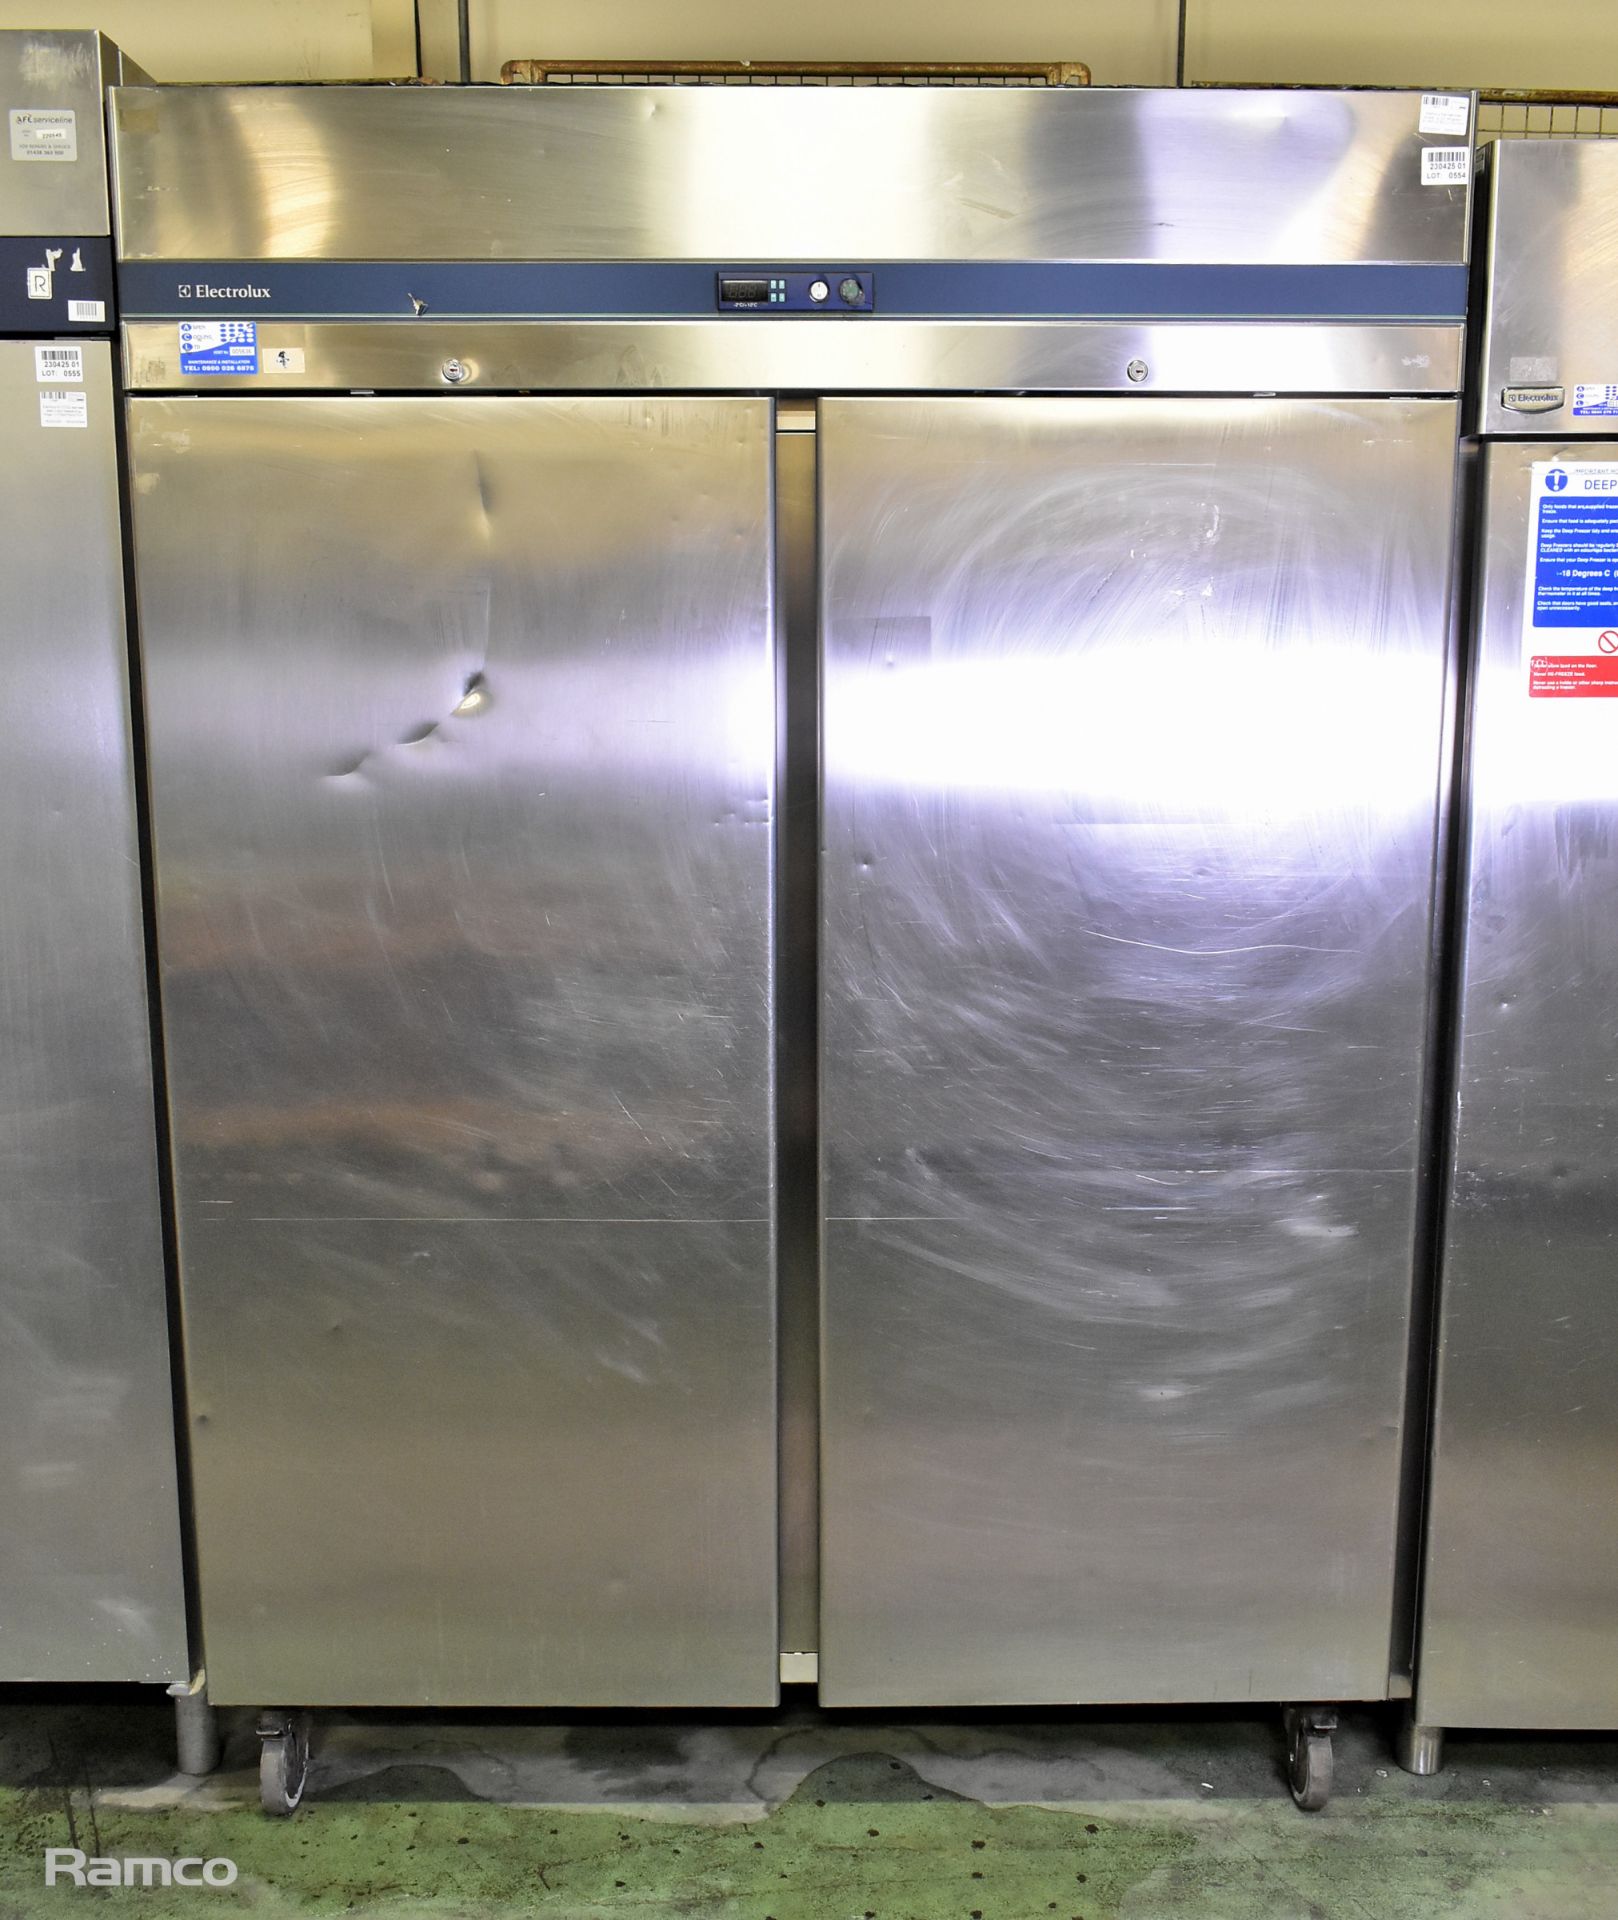 Electrolux Stainless steel, double, upright refrigerator - W 1400 x D 800 x H 2075mm